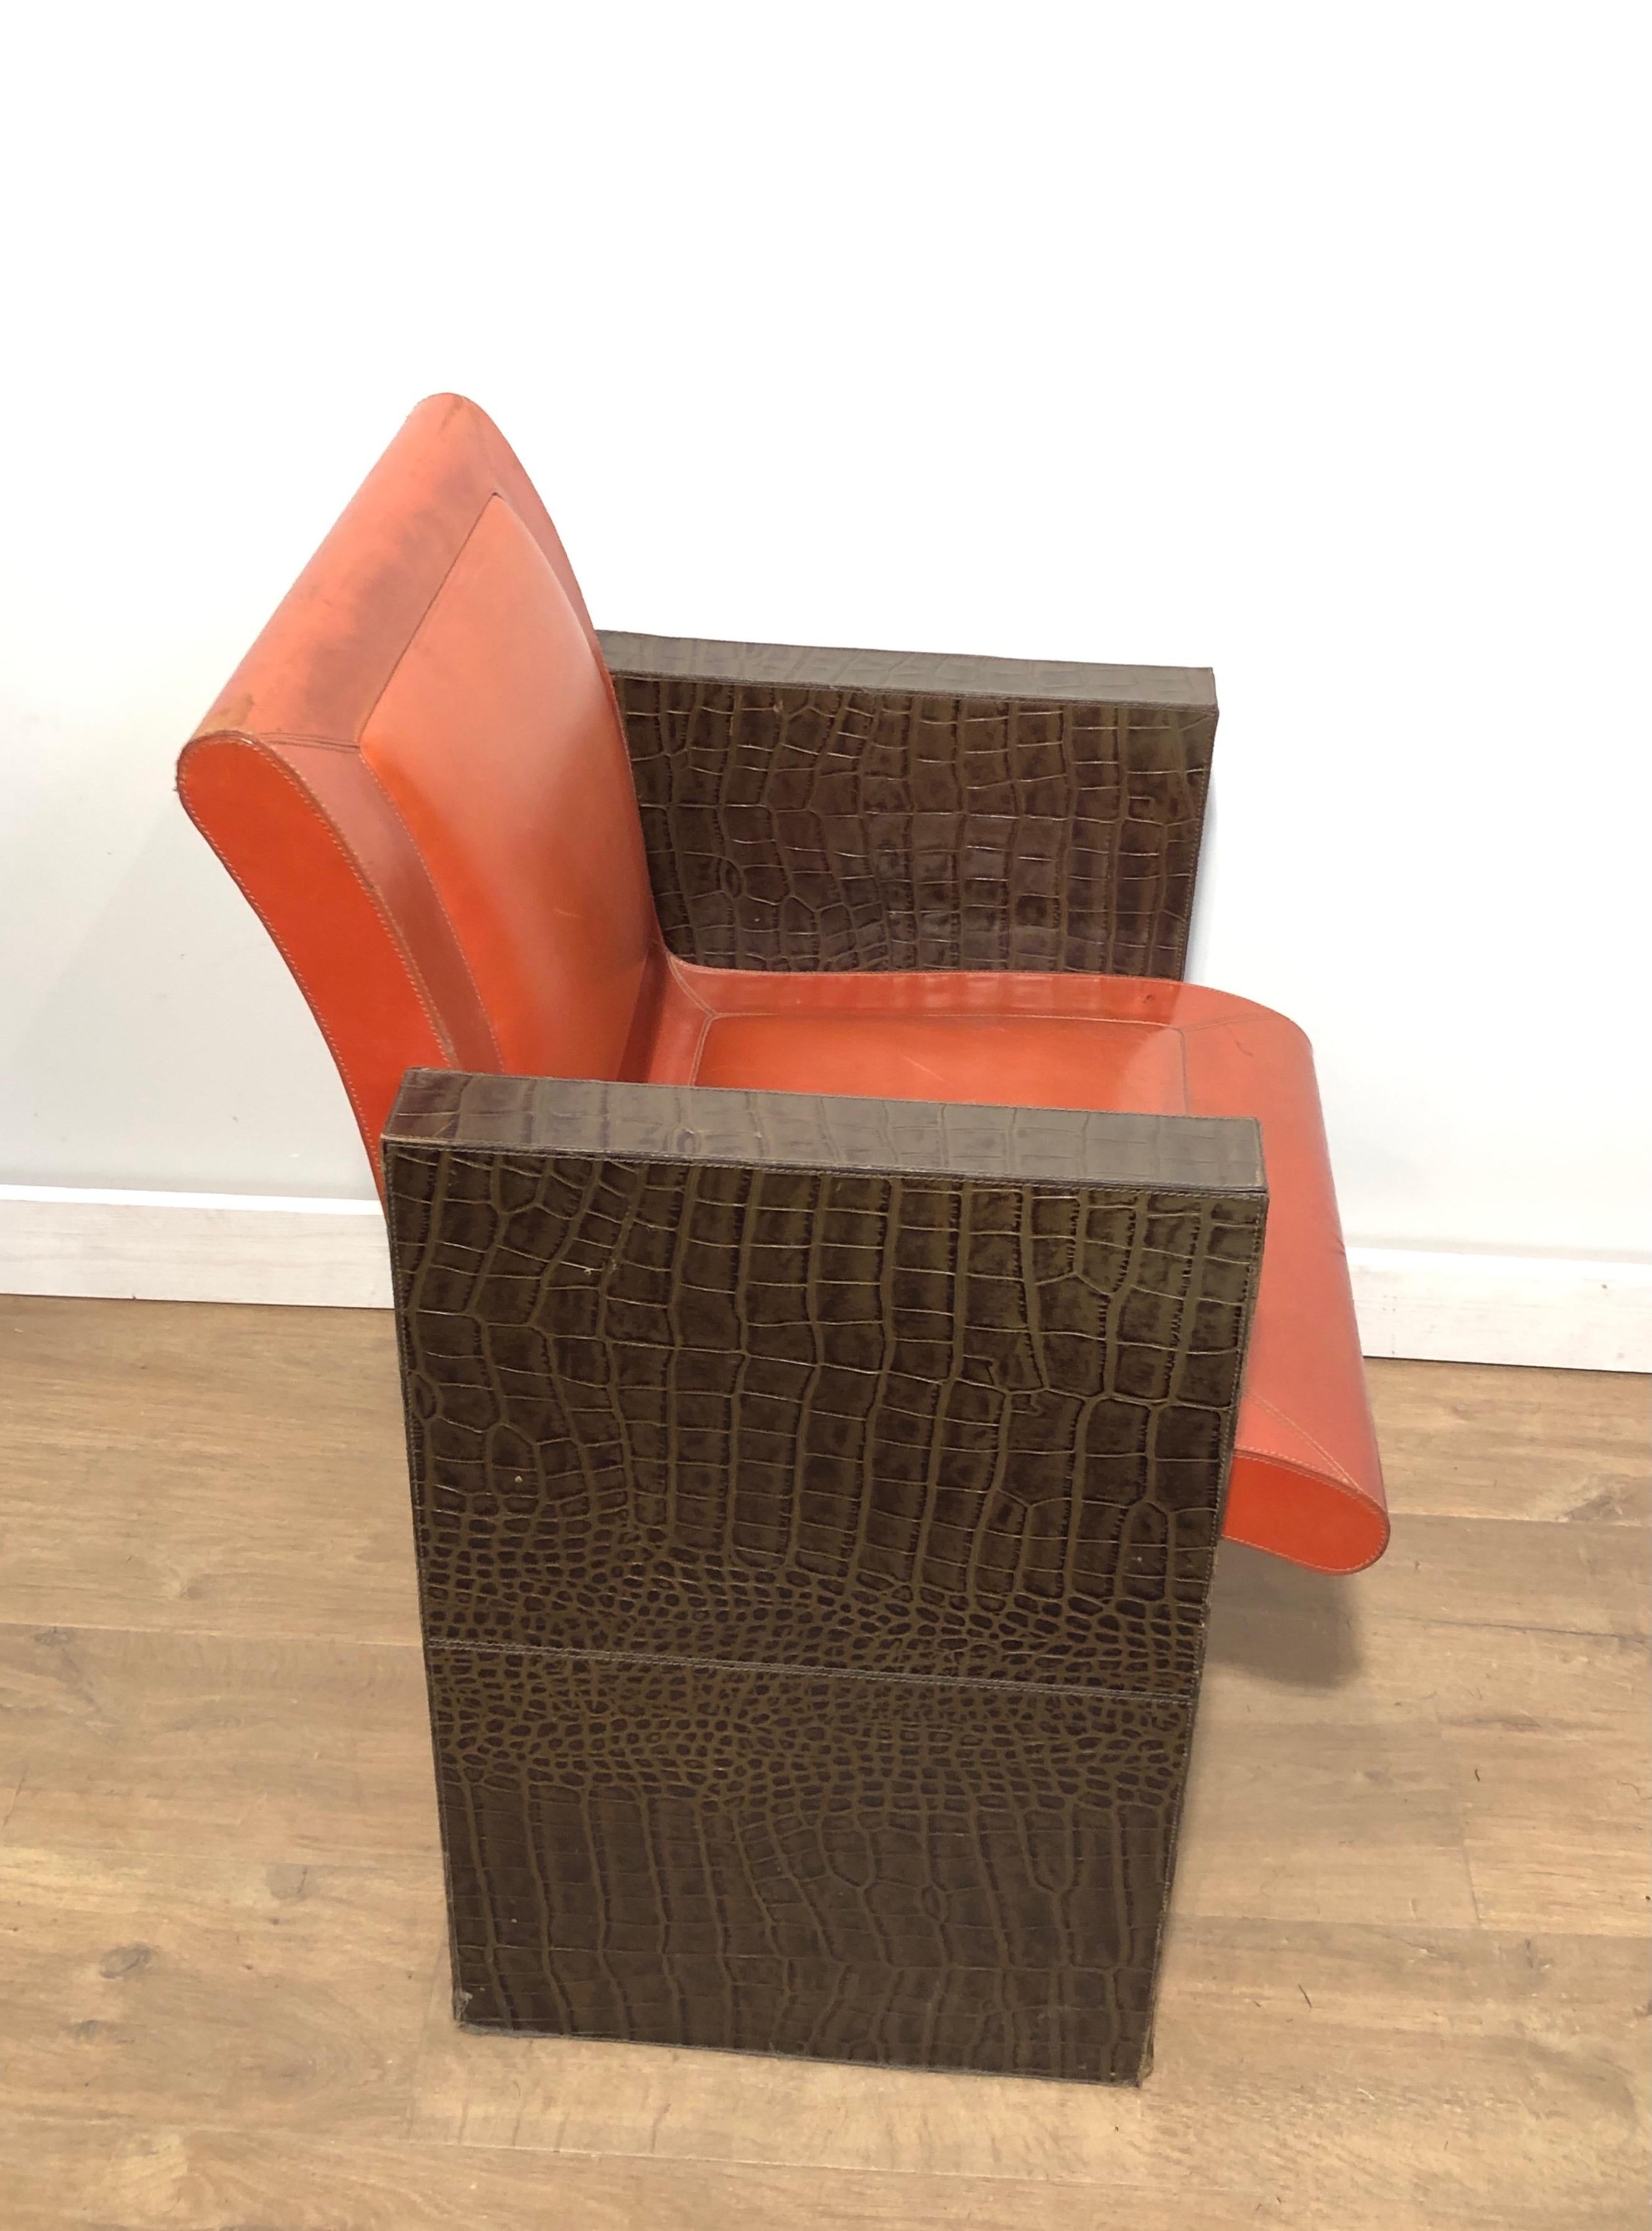 Late 20th Century Pair of orangeish and brown leather armchairs (Can be sold individually). French For Sale